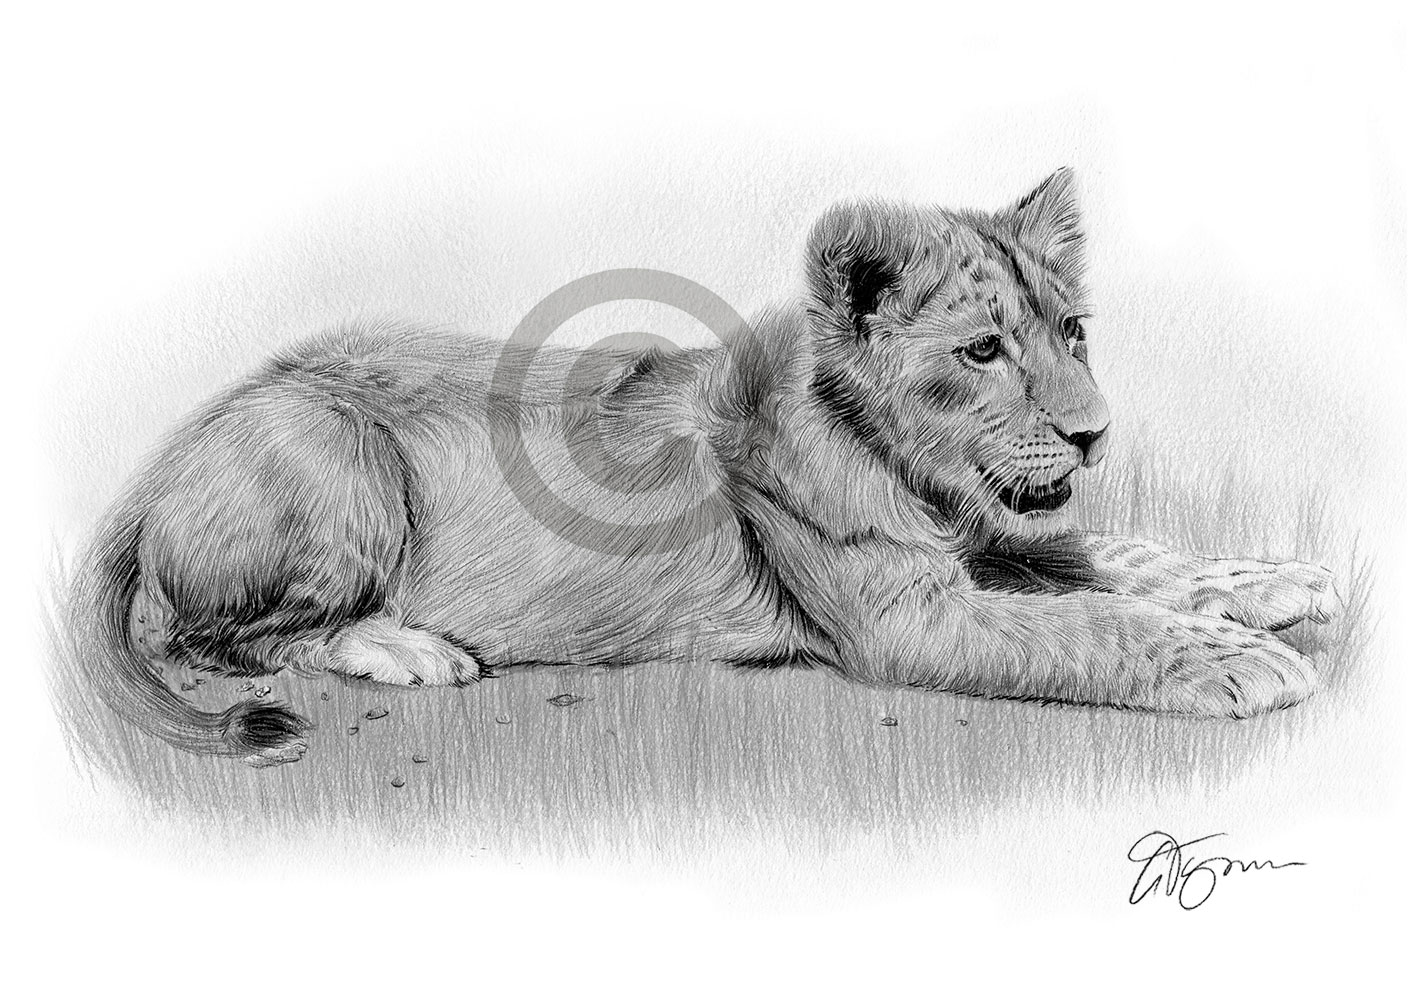 Pencil drawing of a lion cub in landscape by artist Gary Tymon